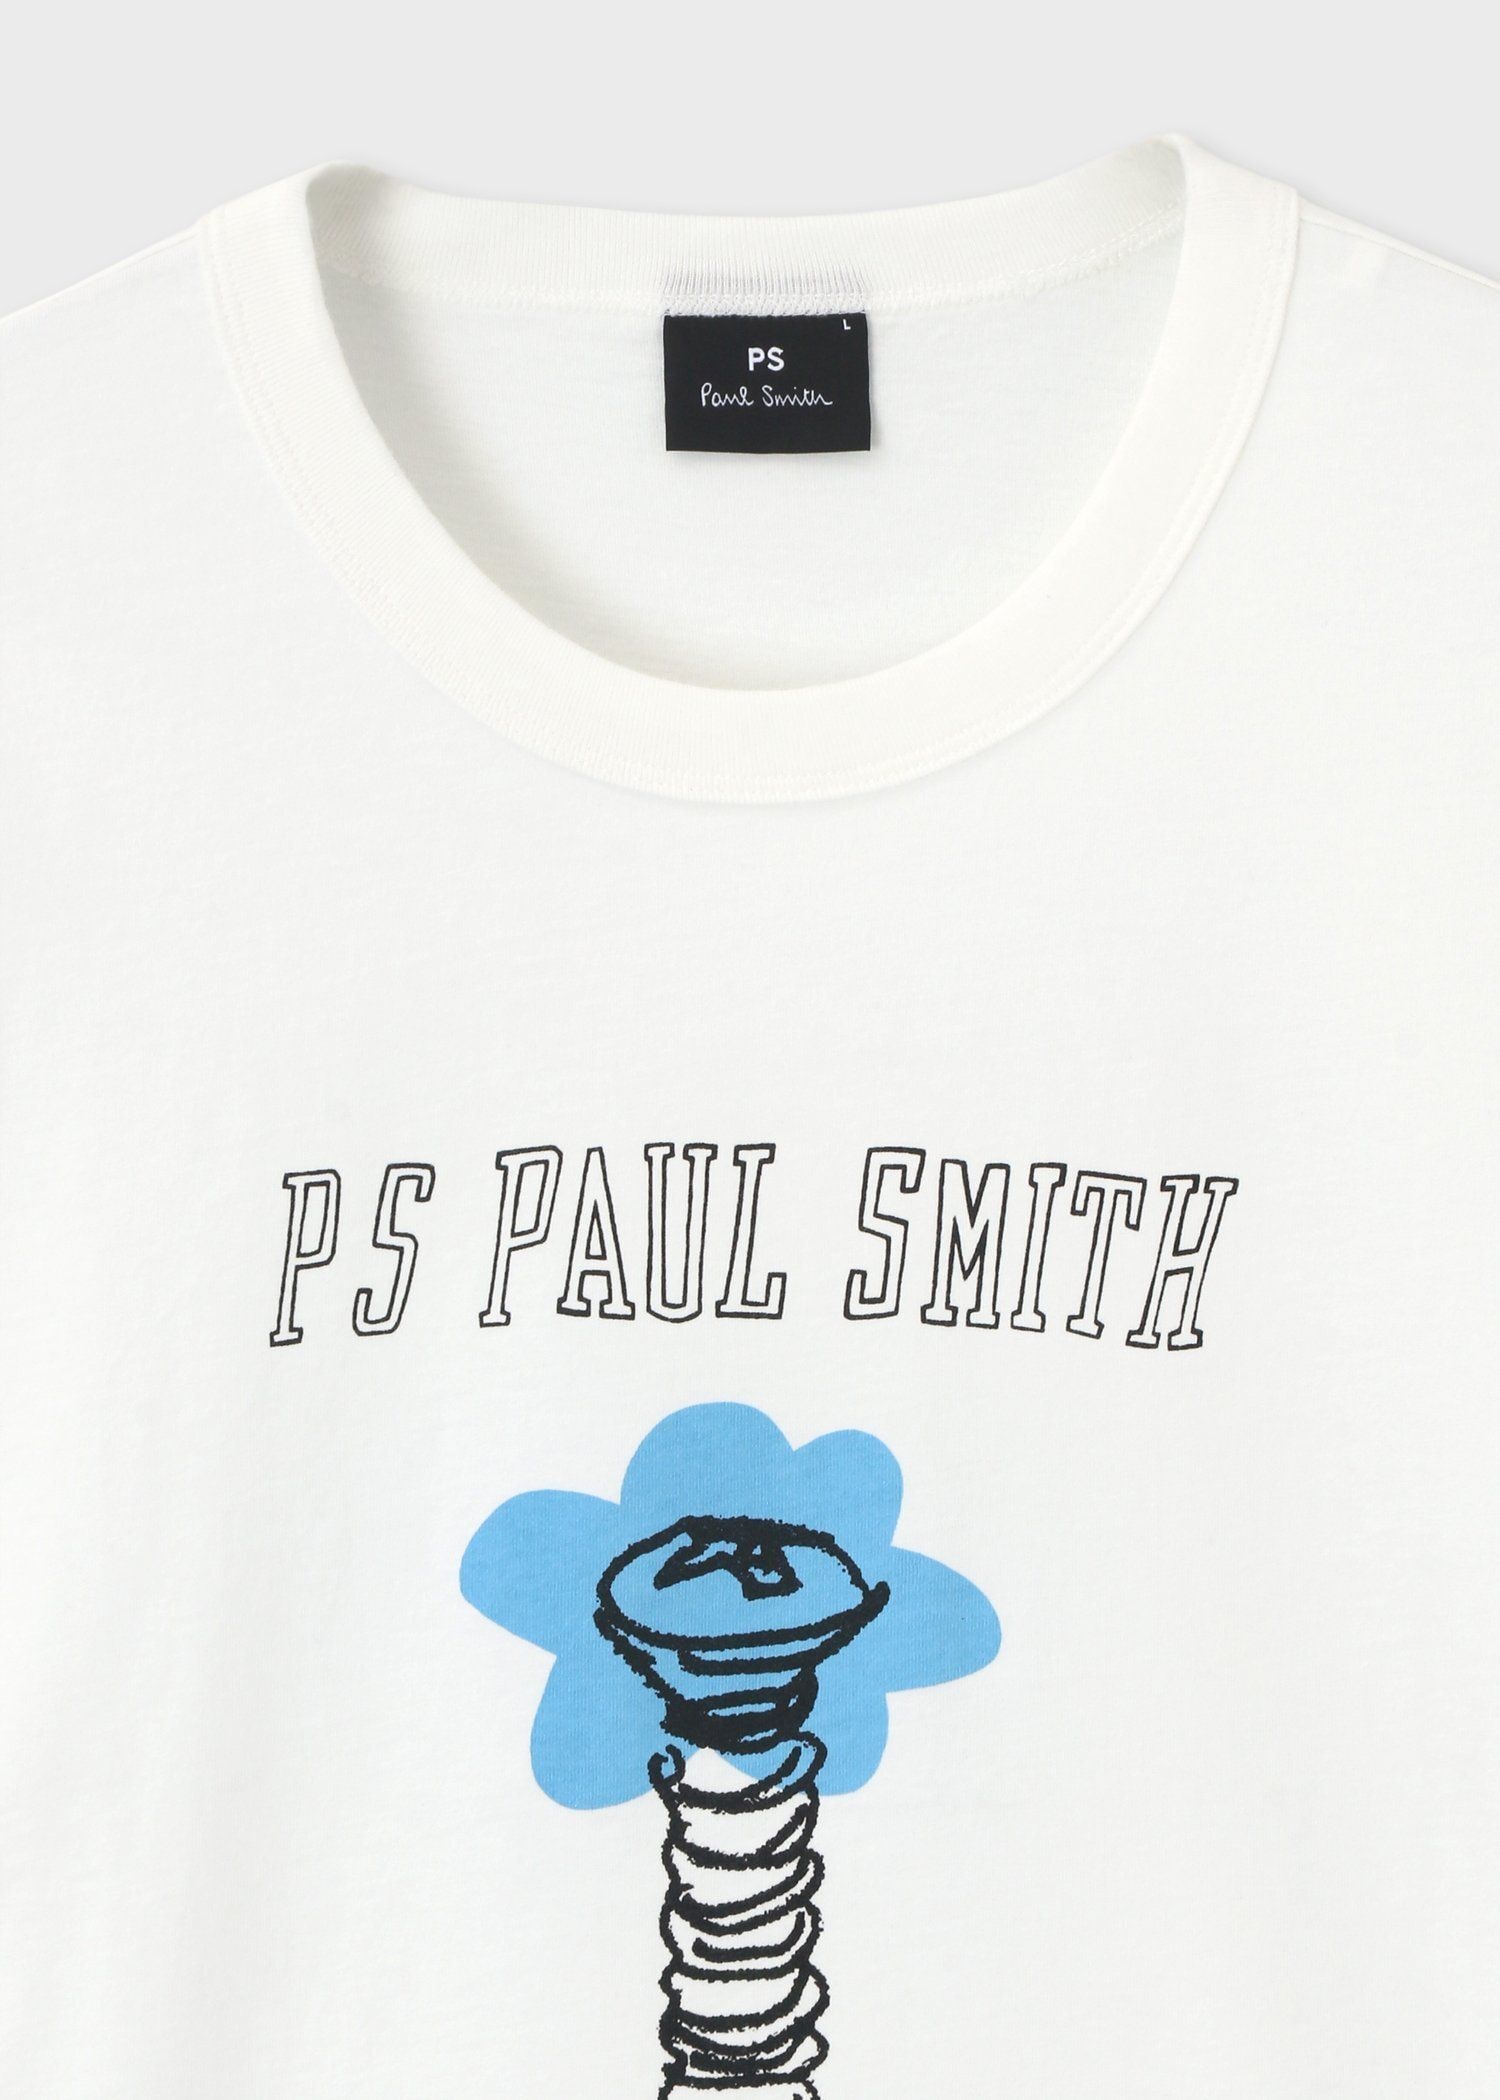 Drawn by Paul "Spin me round" Tシャツ